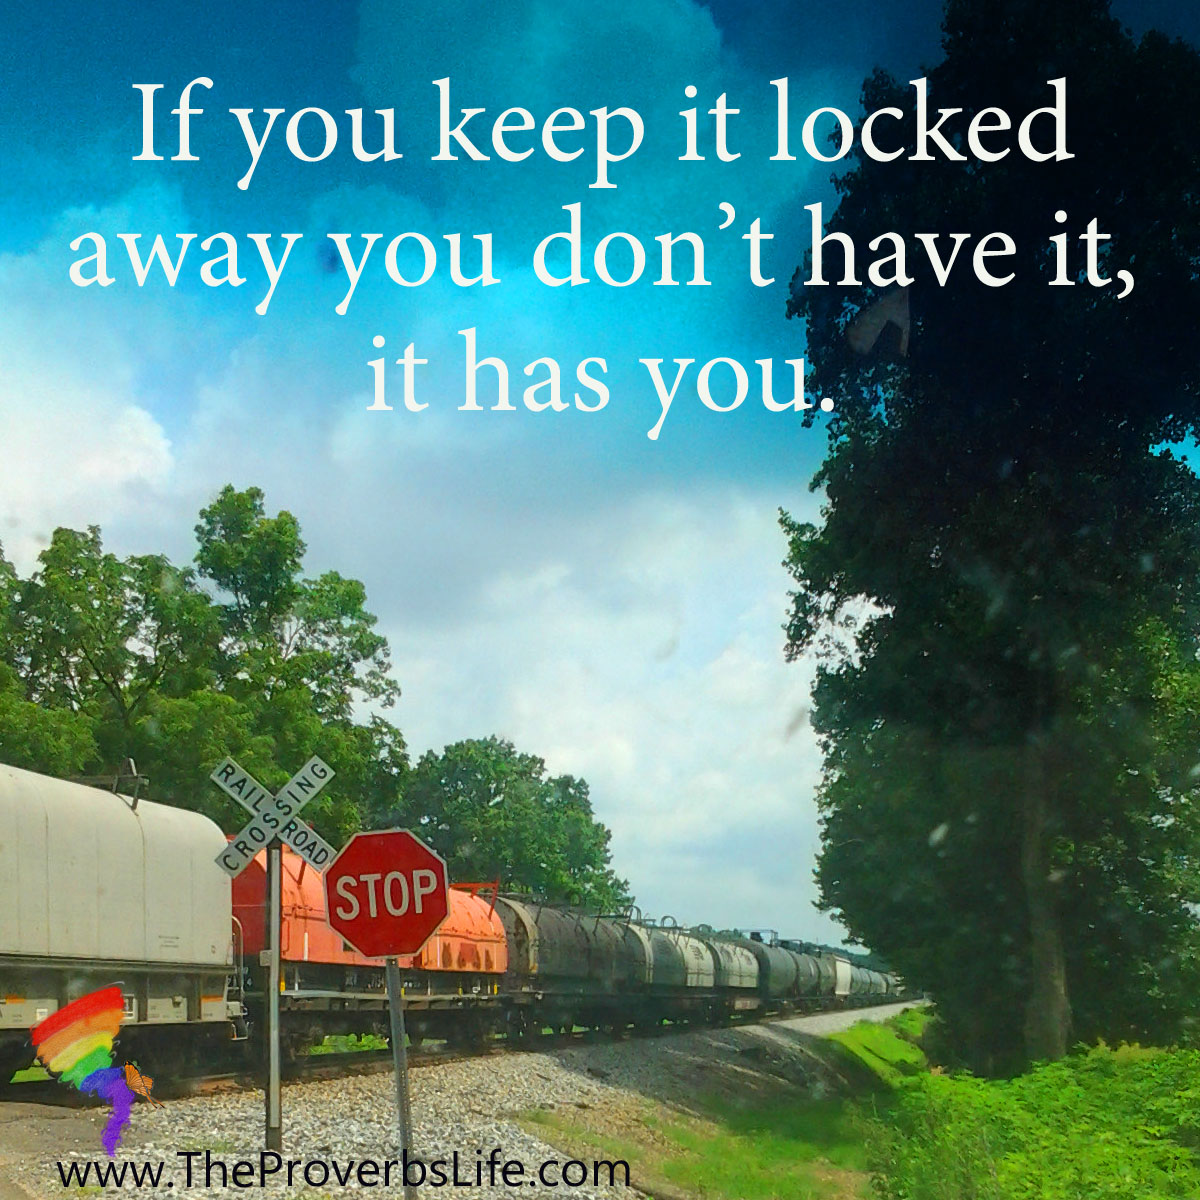 Quote of the Day - locked away